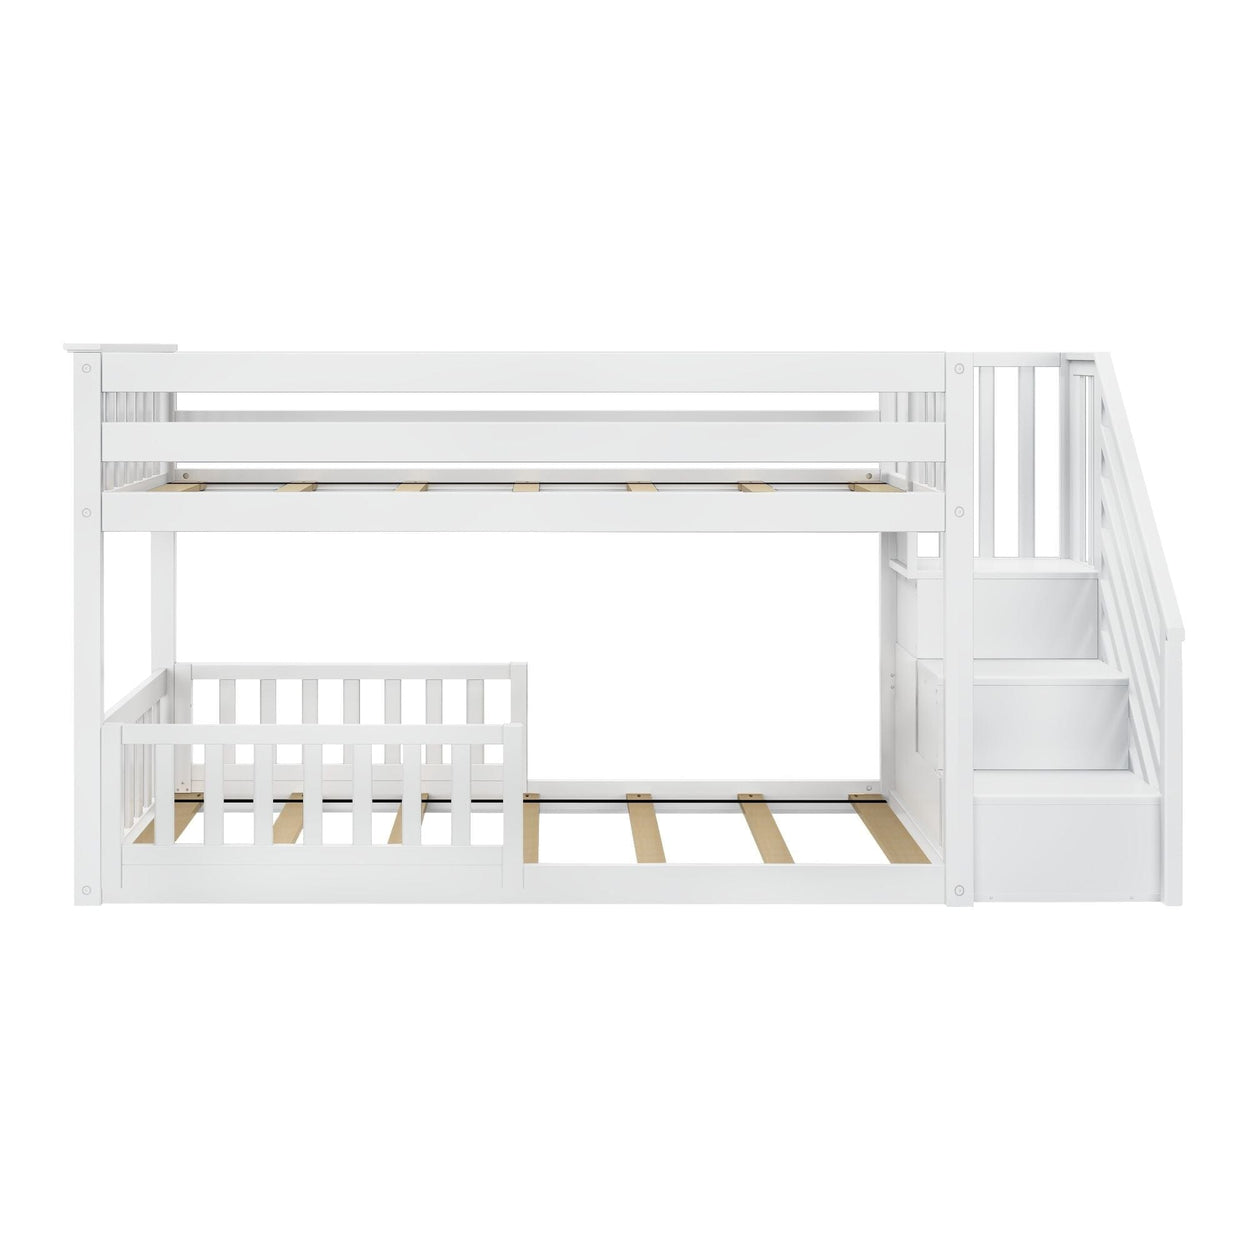 185220002209 : Bunk Beds Low Bunk with Stairs and Two Guard Rails, White